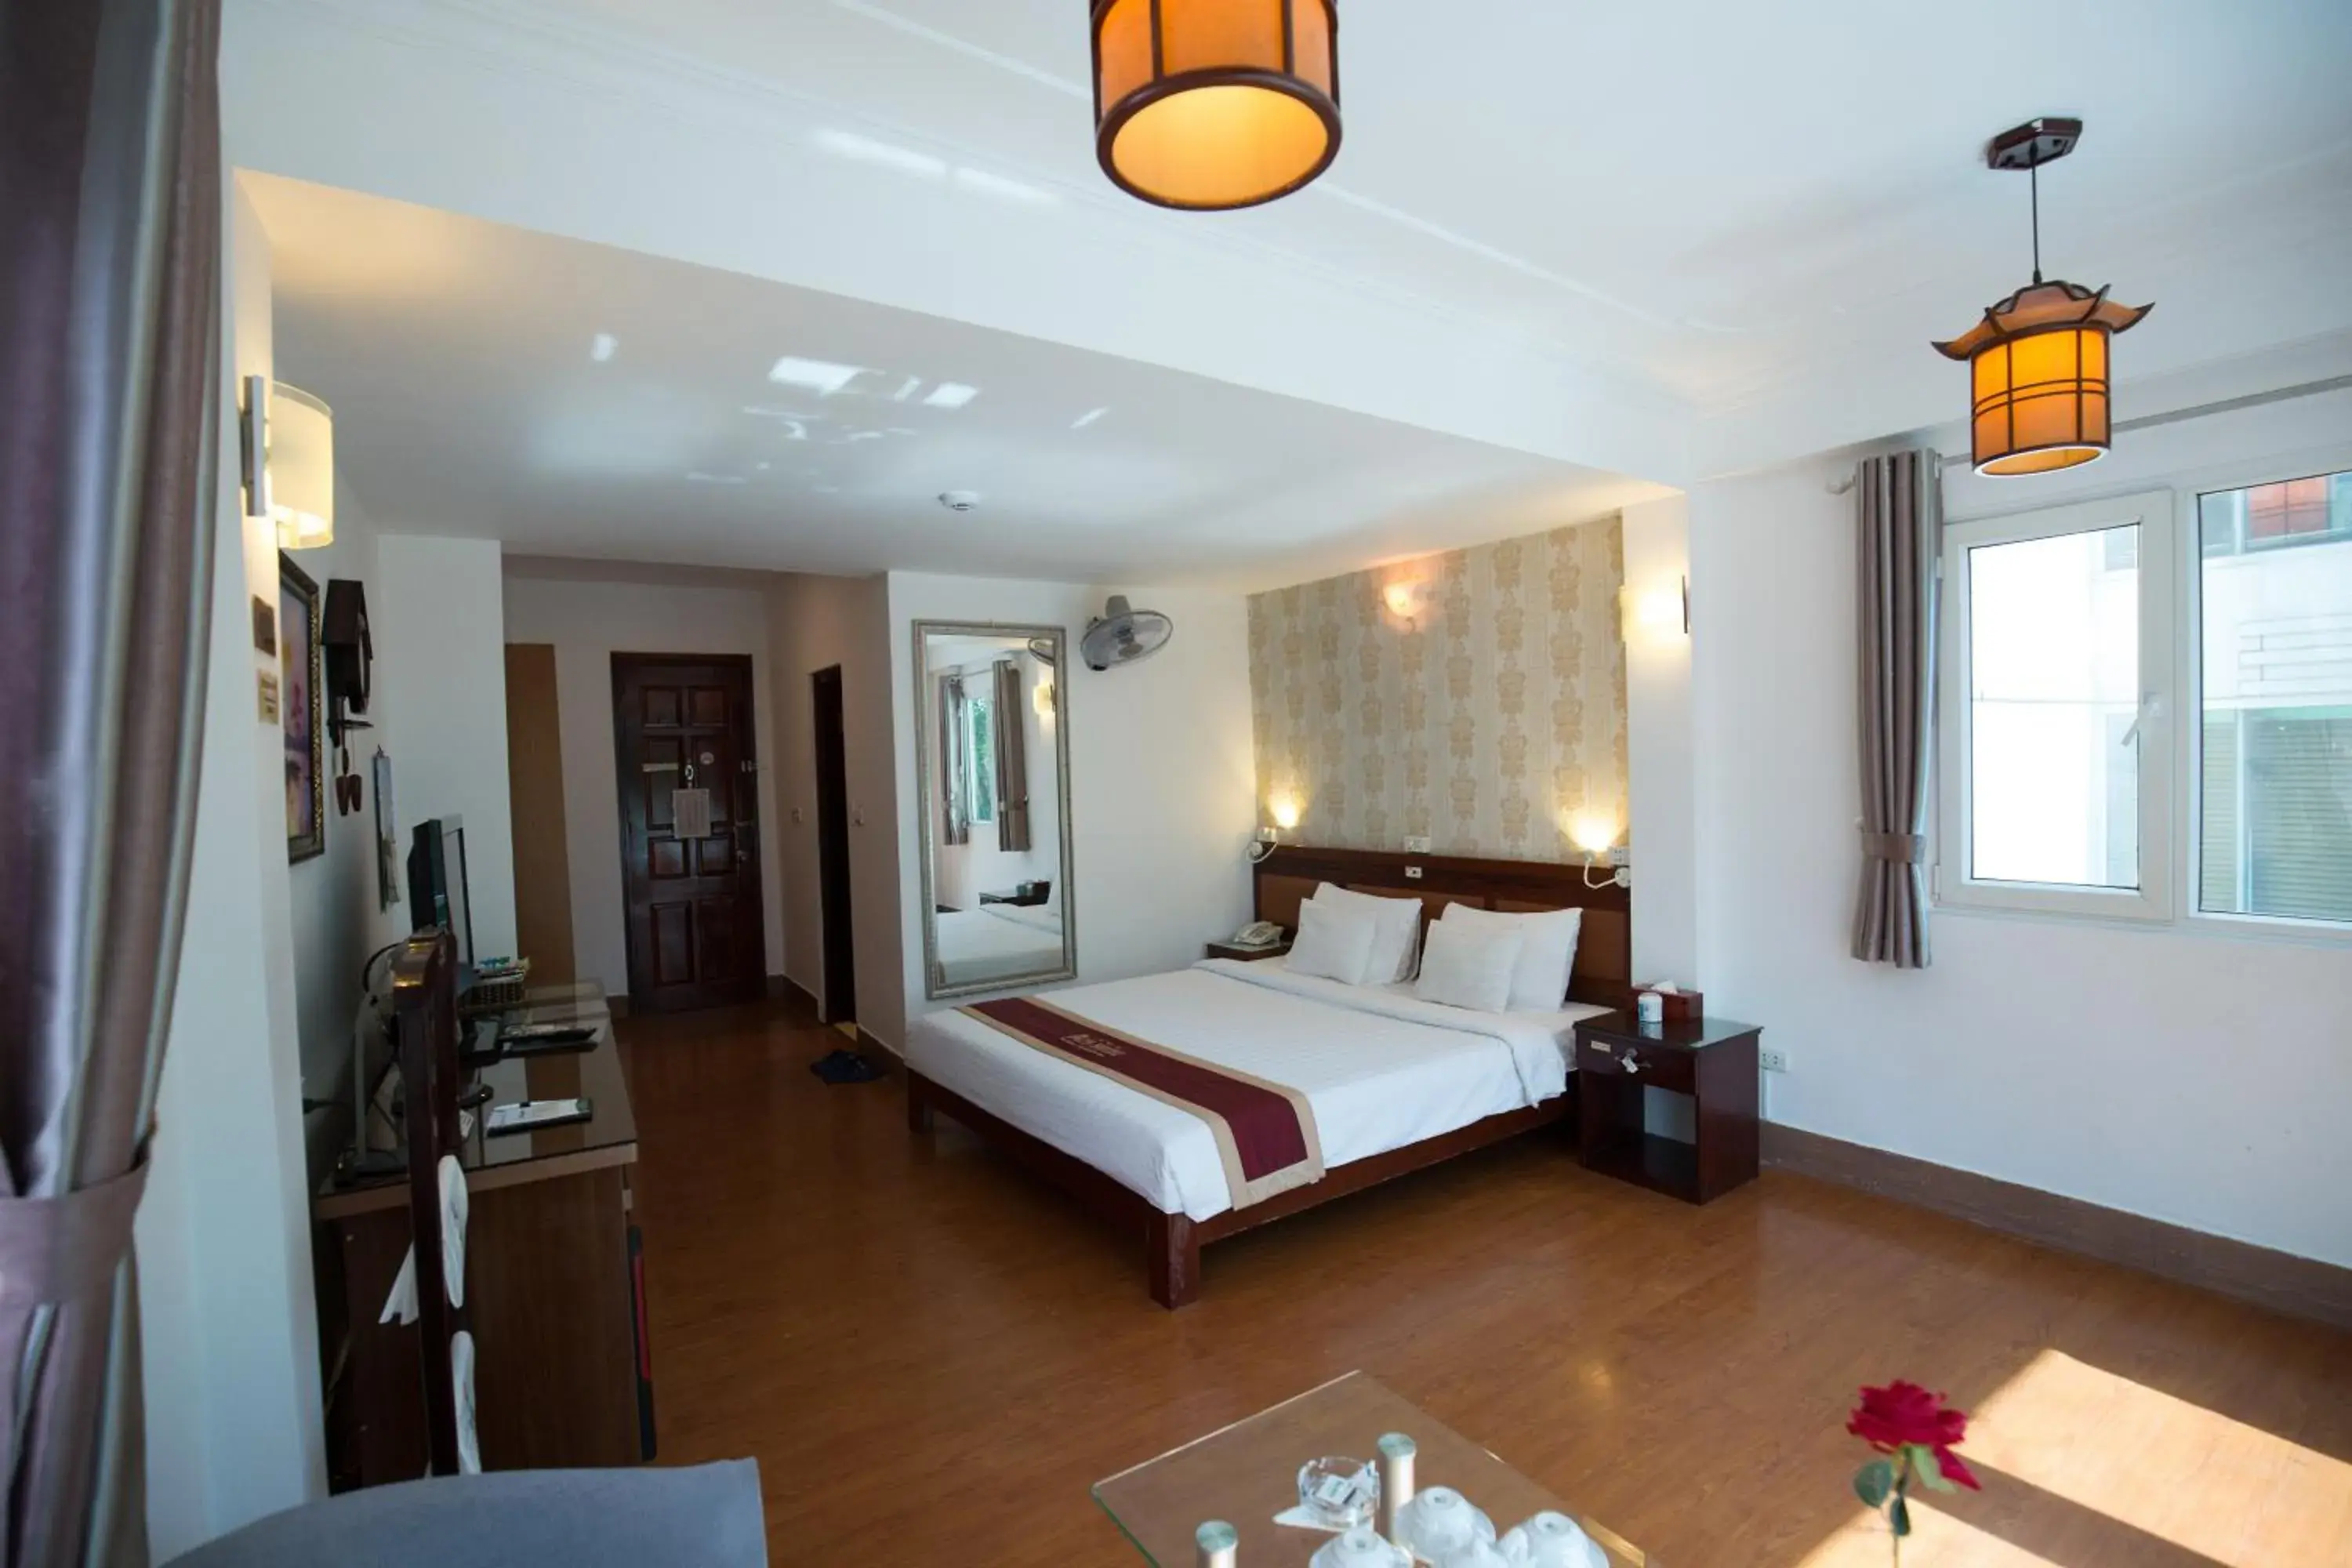 Bed in A25 Hotel - 57 Quang Trung